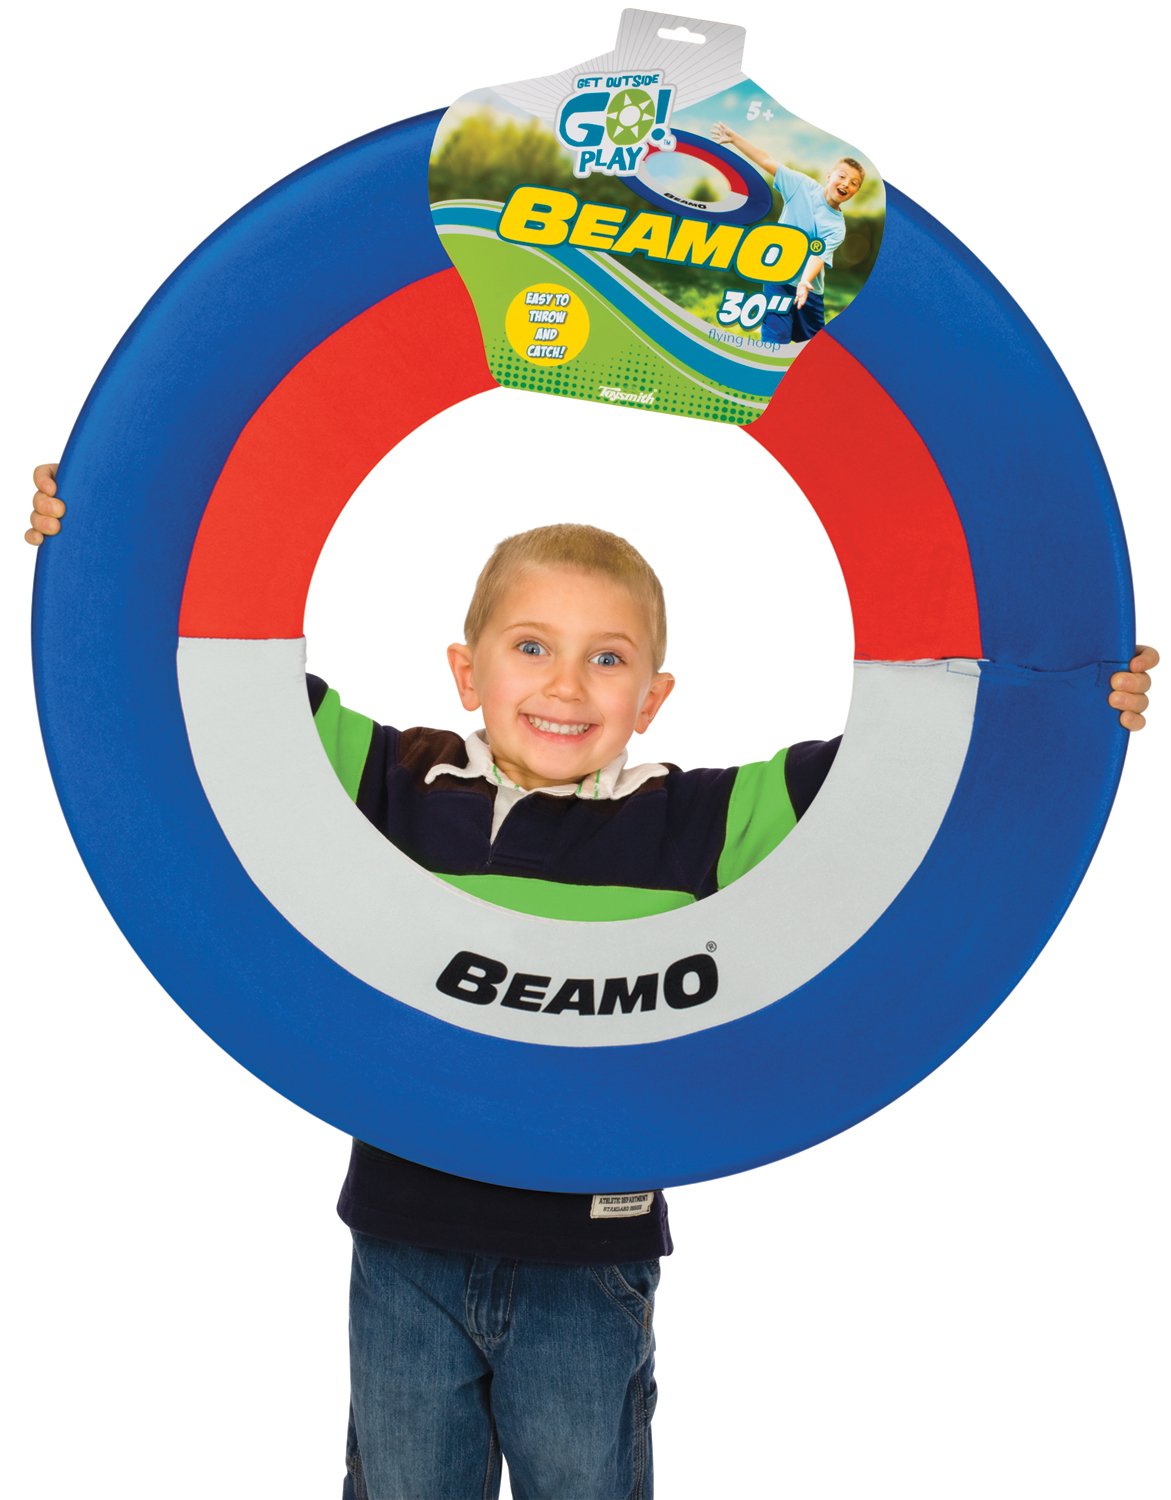 Toysmith Get Outside GO! Beamo Flying Hoop (30-Inch, Assorted Colors), multi (6101AM)